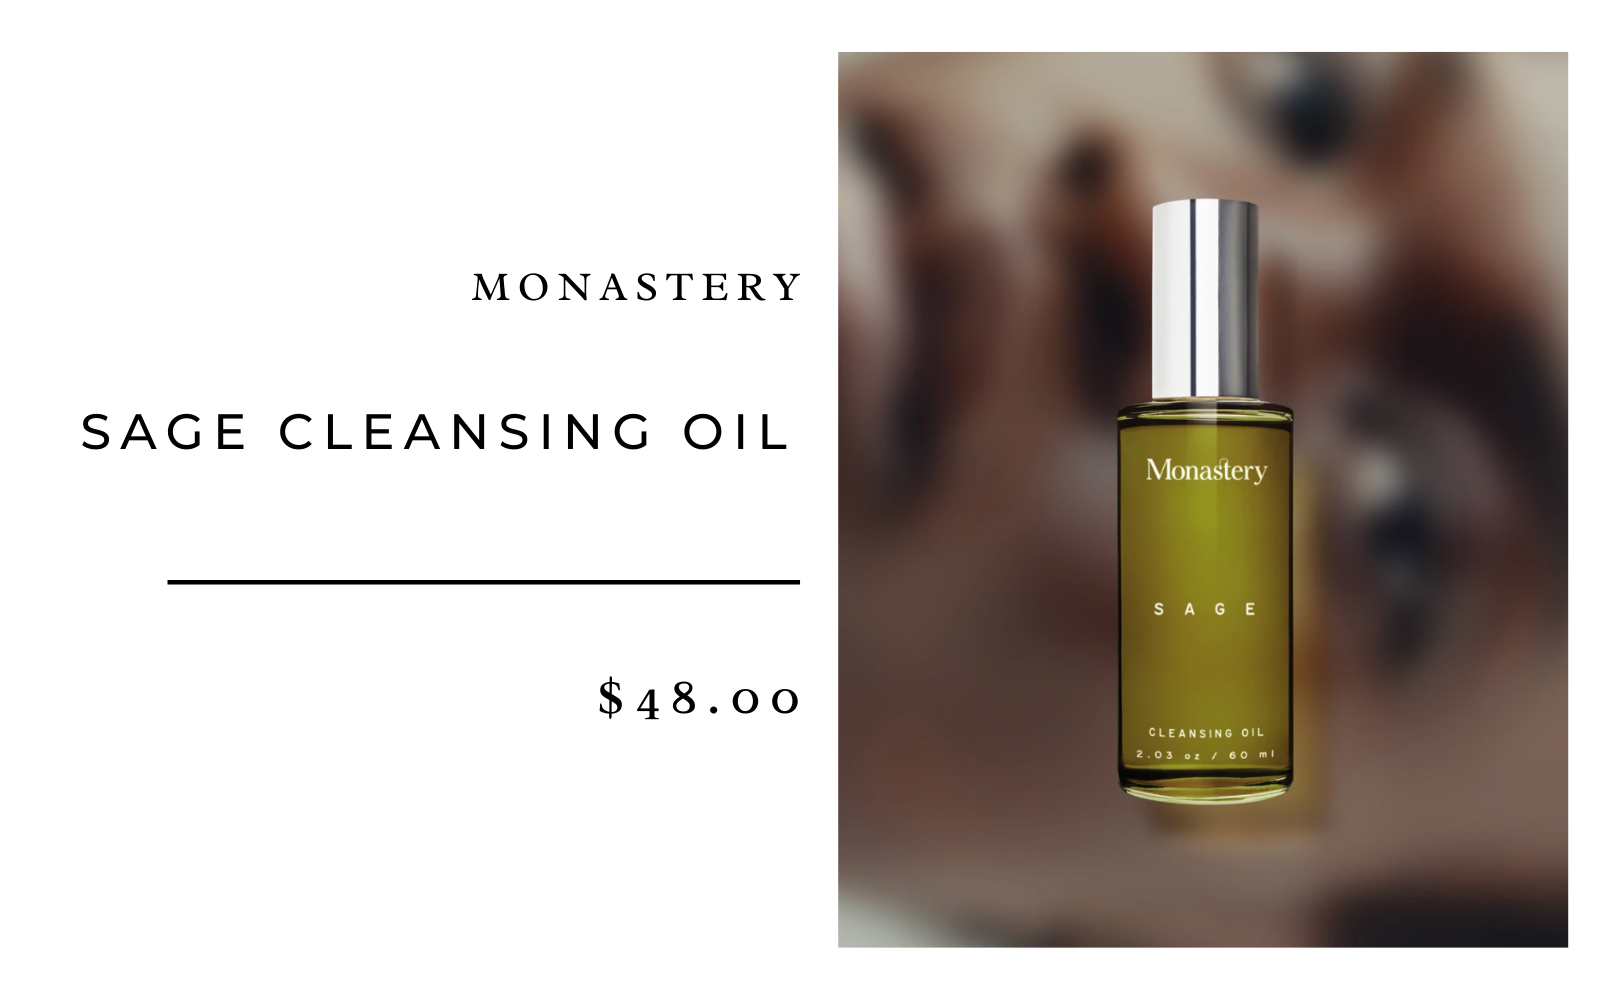 Monastery Sage Cleansing Oil 